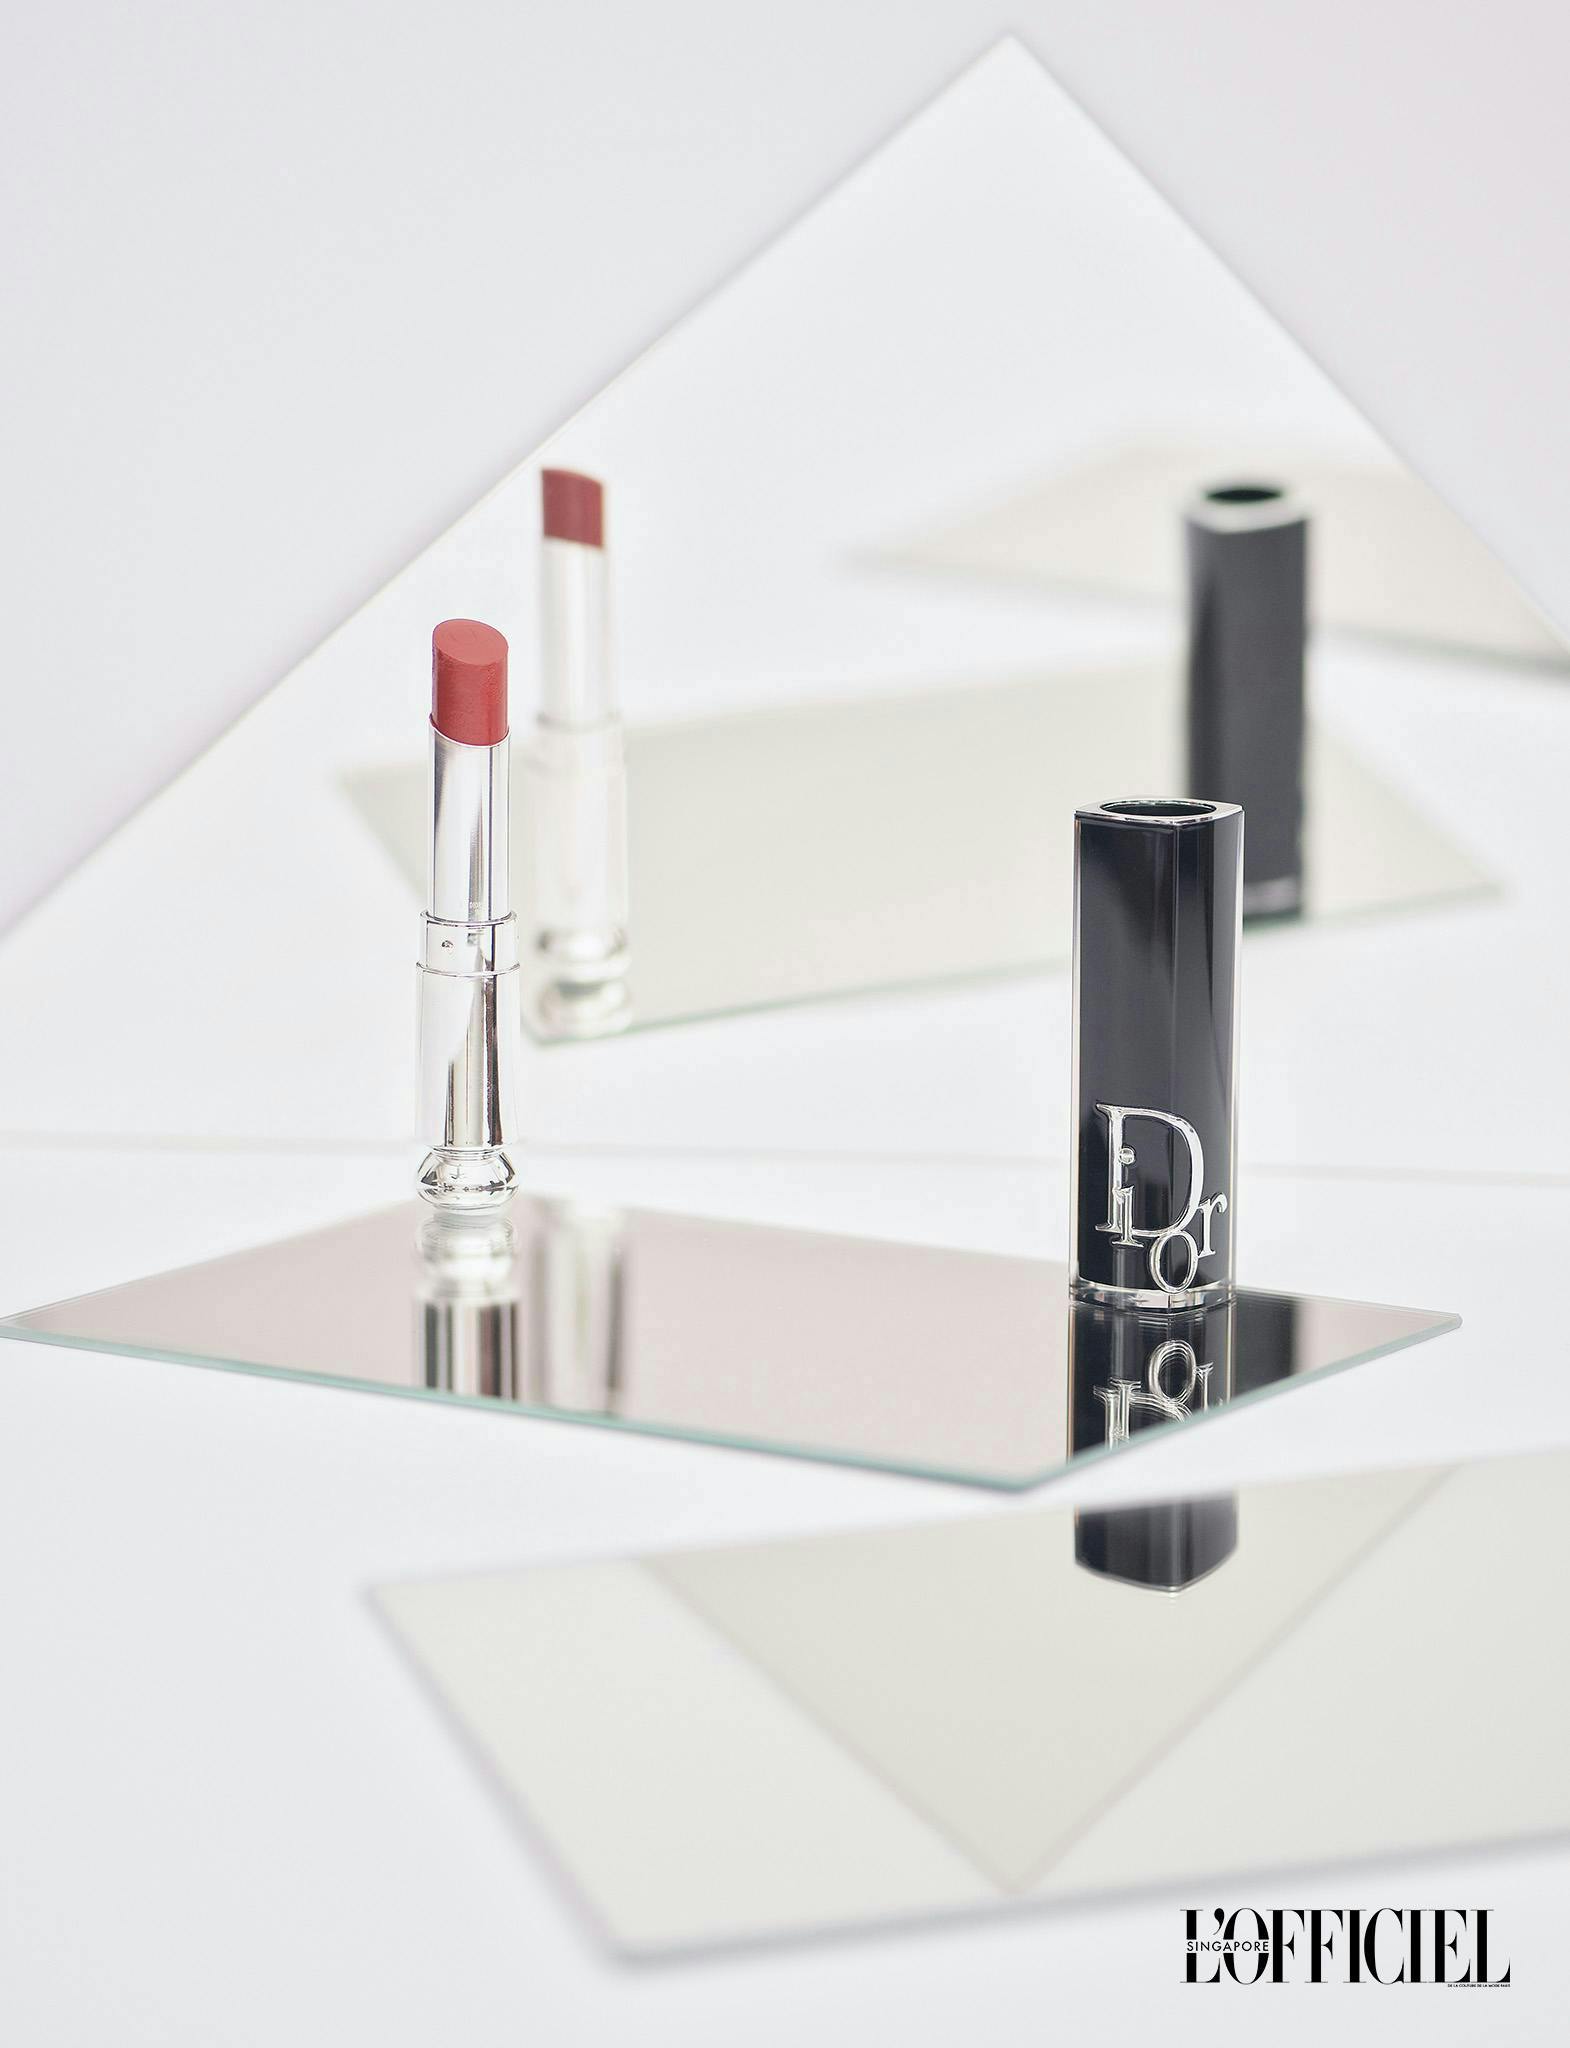  DIOR BEAUTY DIOR ADDICT LIPSTICK IN SHADE 8, $58. Blackpink member Jisoo’s current favourite lipstick takes glamour to a whole new level with its nourishing and naturally-pigmented shade. The perfect lip accessory for daily wear and nights out.